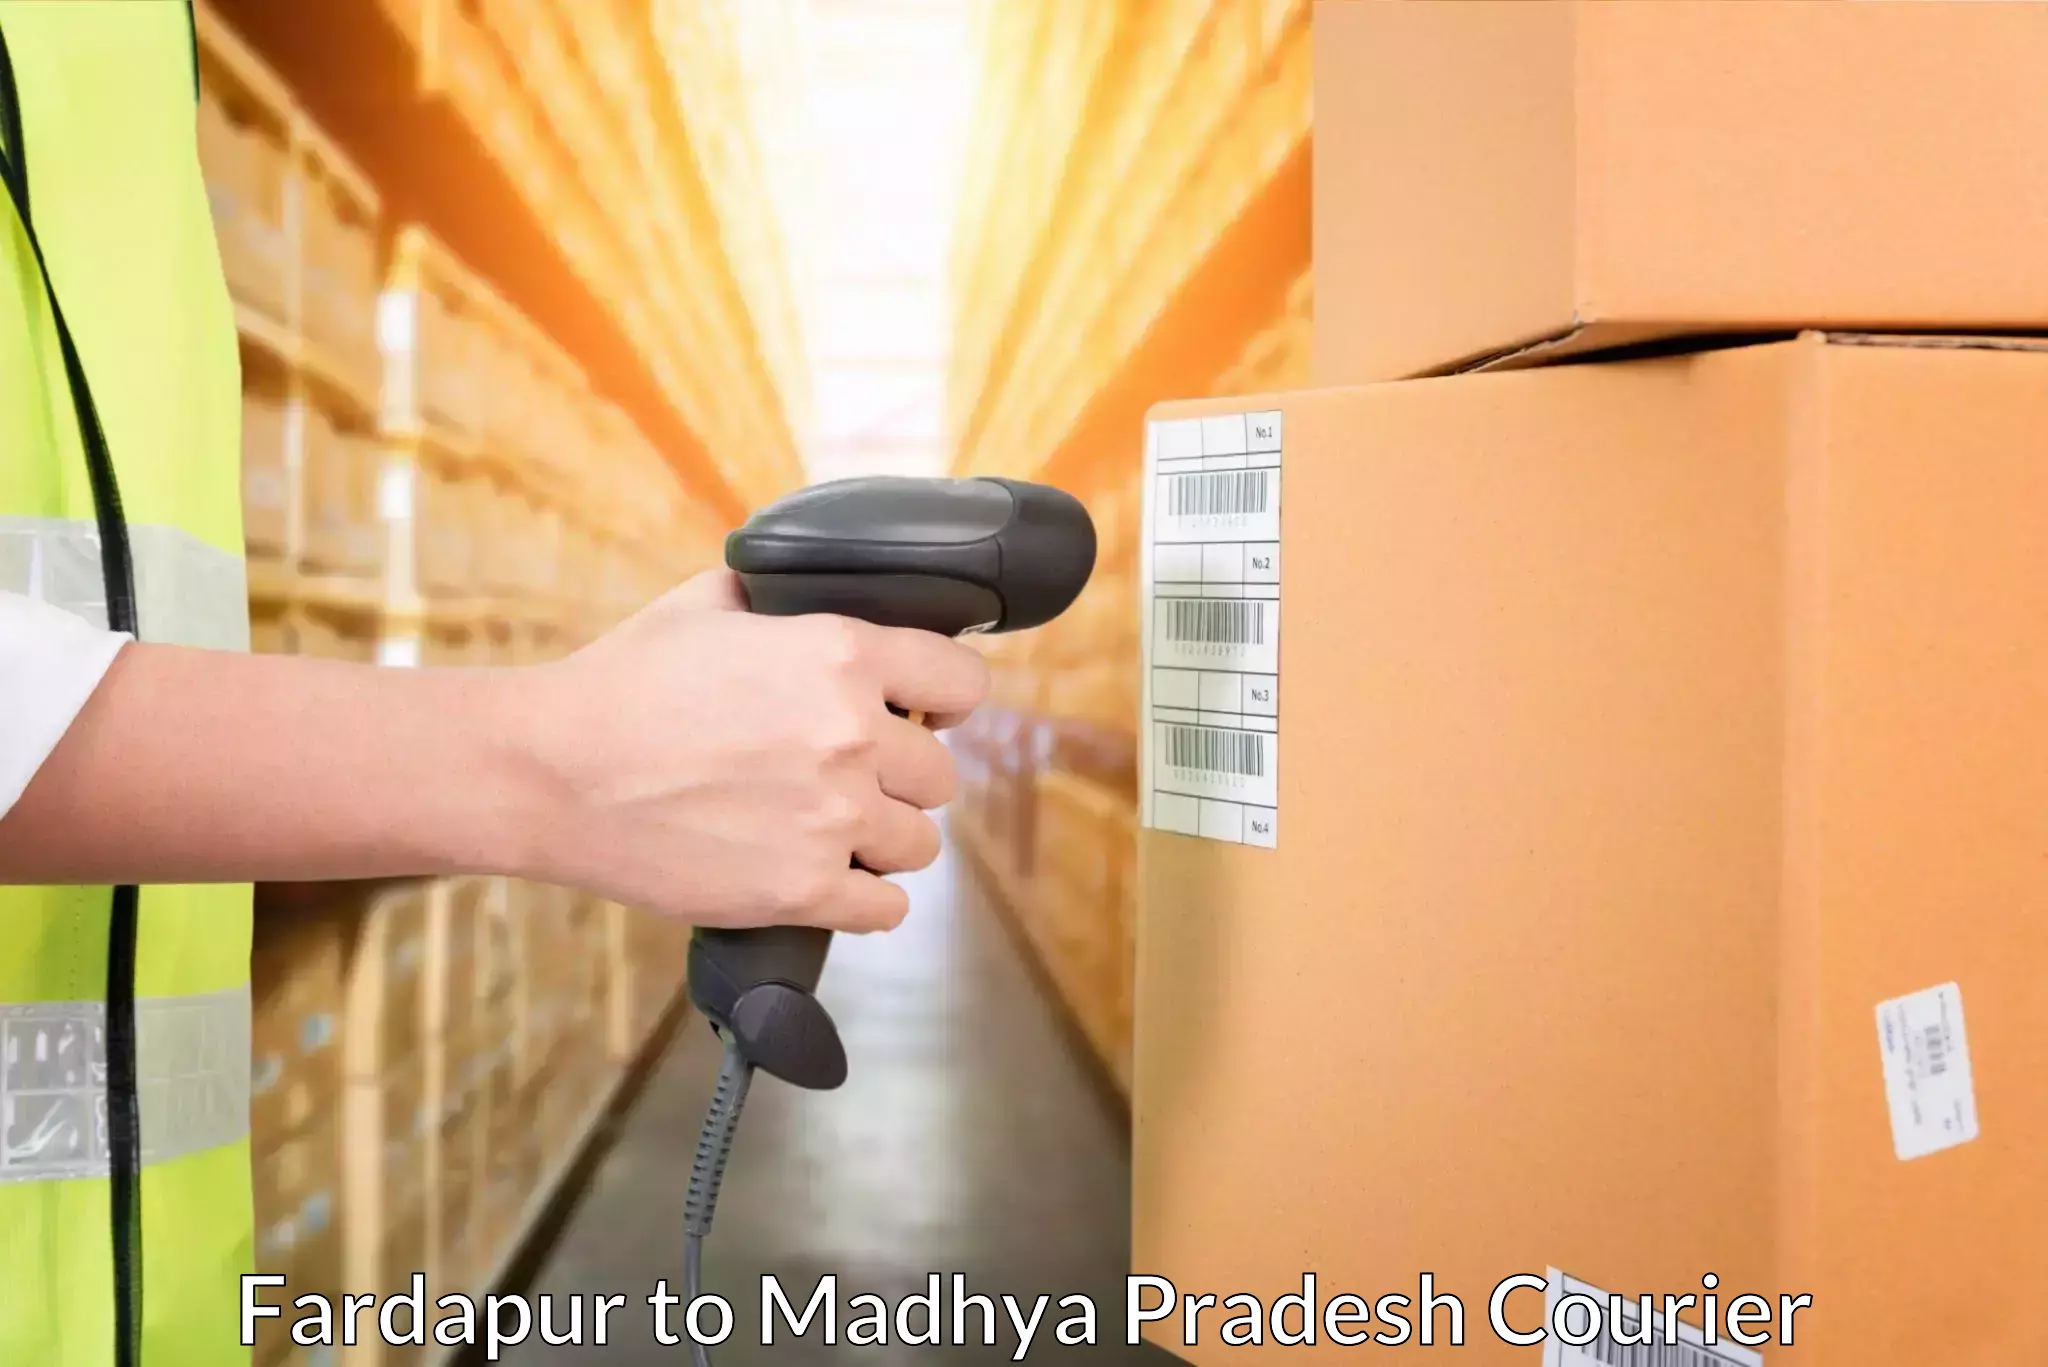 Affordable parcel service Fardapur to Bhopal